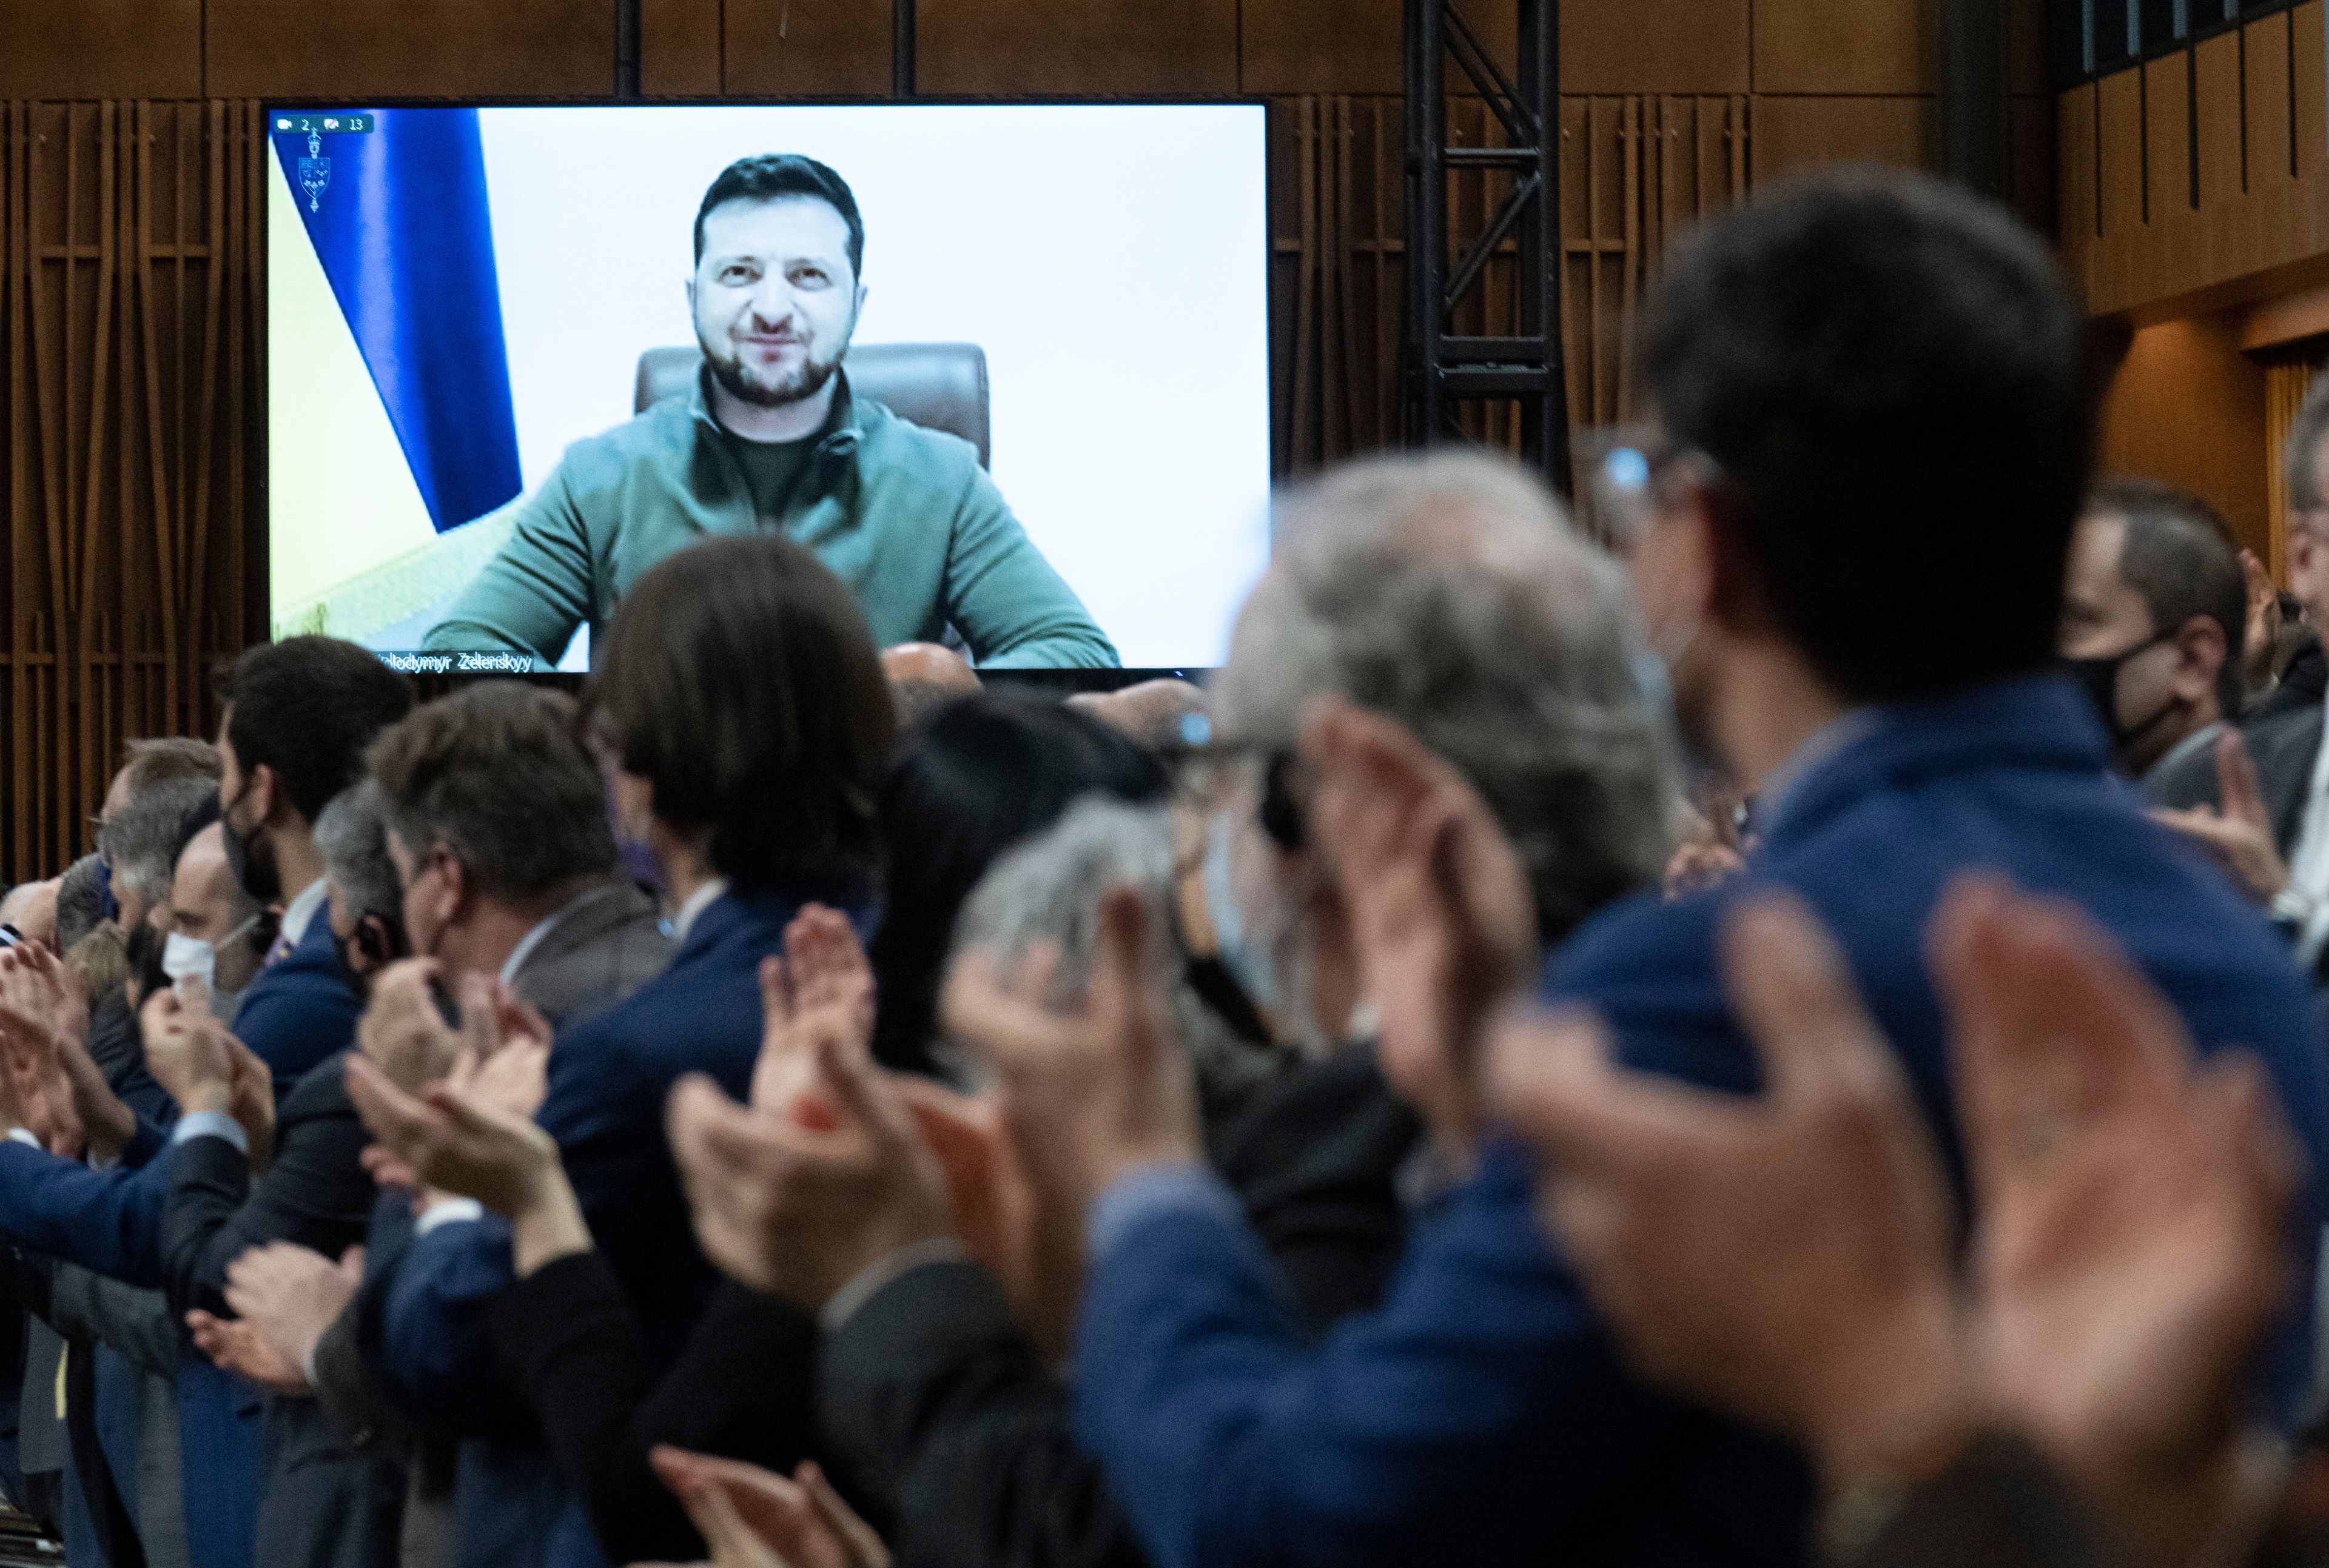 Canadian parliamentarians and guests give Ukrainian President Volodymyr Zelenskyy a standing ovation as he addresses Parliament on March 15, 2022 (Adrian Wyld/CP)